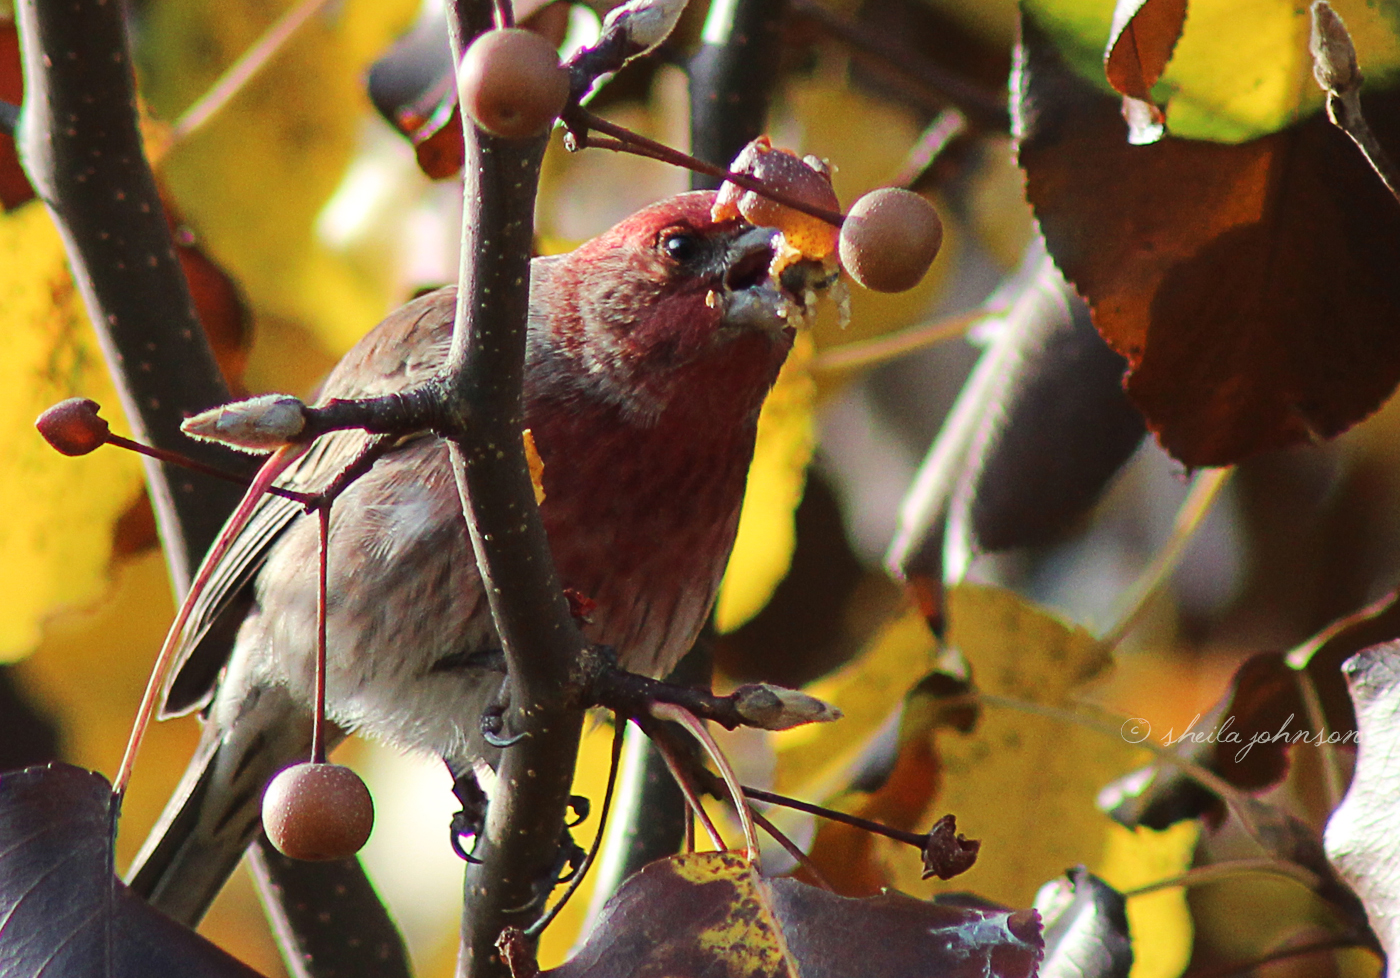 A Purple Finch Gets The Last Of The Fresh Berries From This Tree, As The Leaves Turn In The Cool Fall Air.